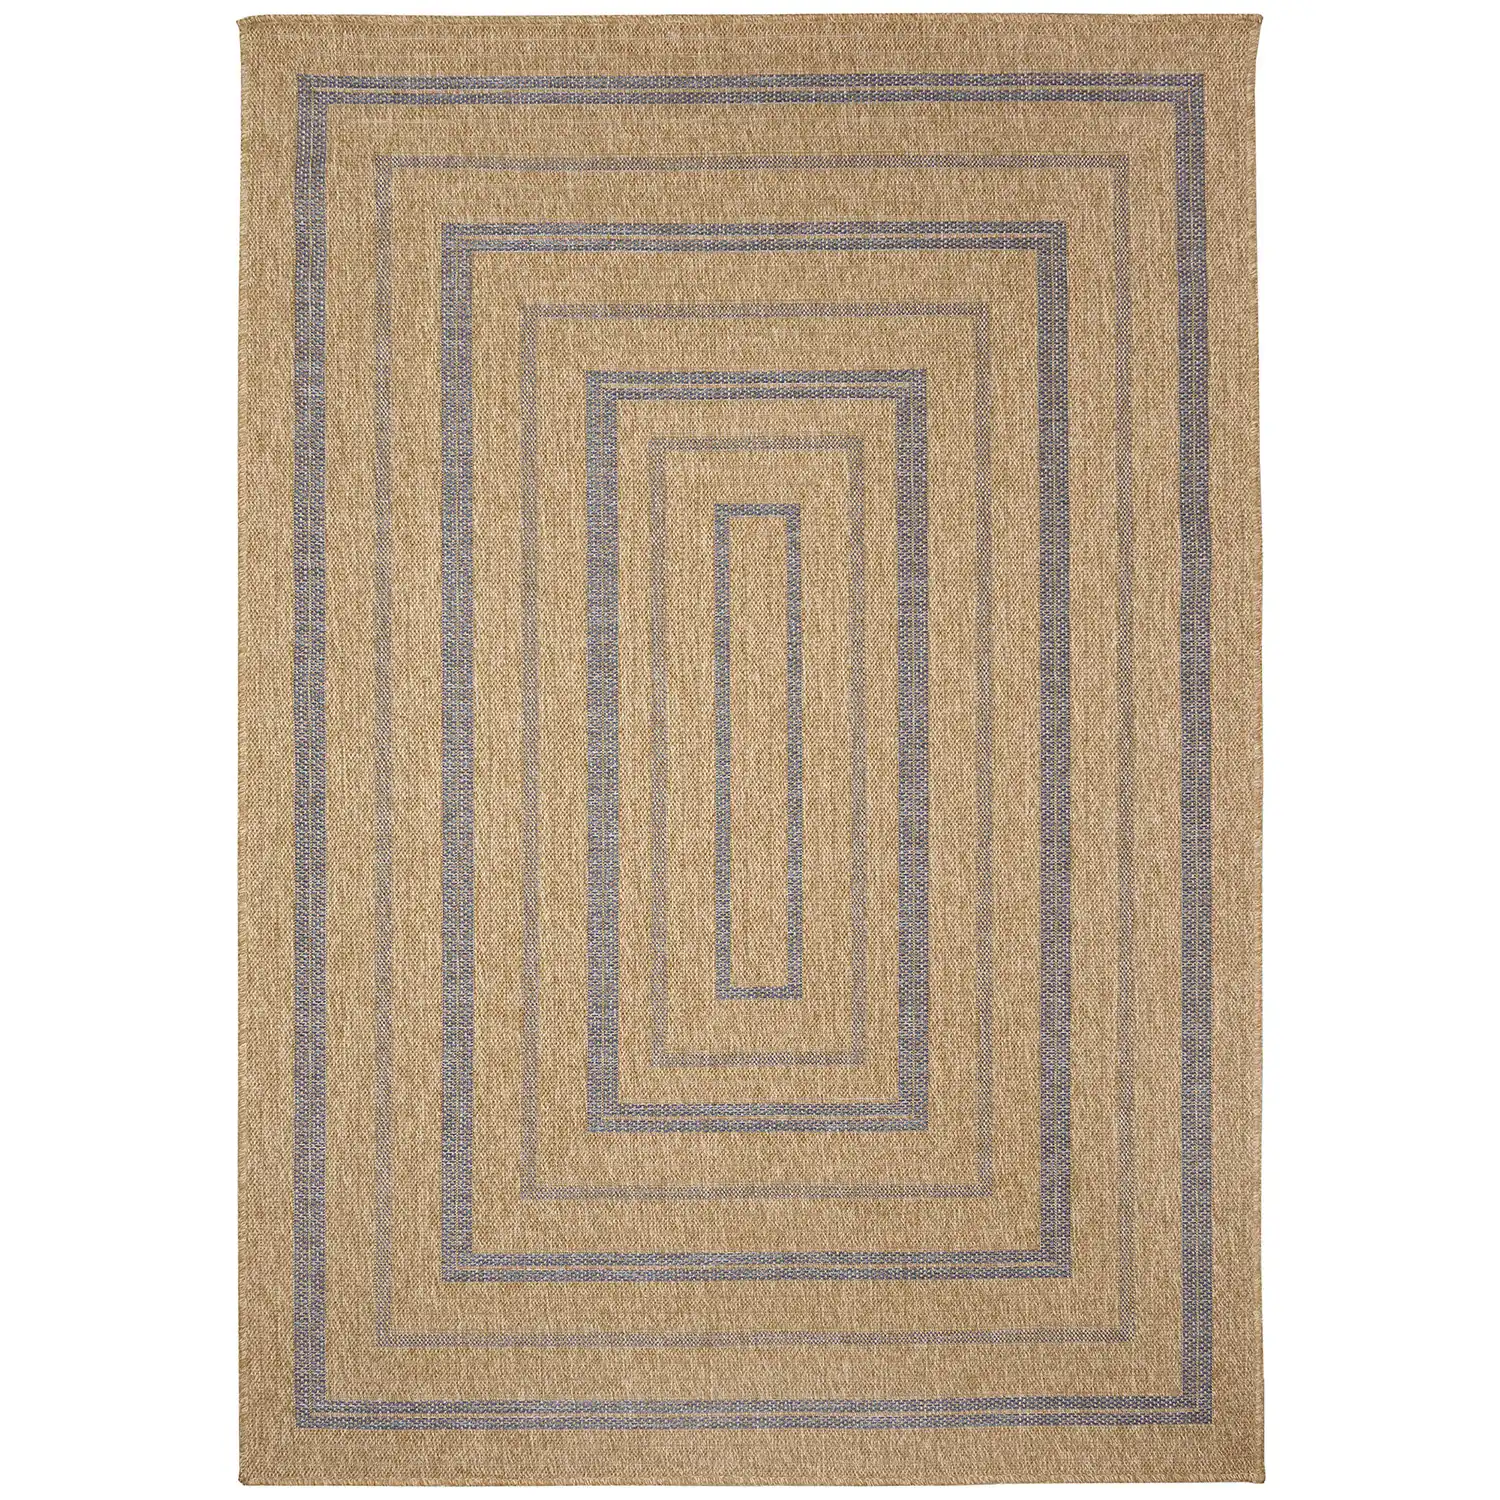 Liora Manne Sahara Low Profile  Easy Care Woven Weather Resistant Rug- Multi Border Navy  Product Image